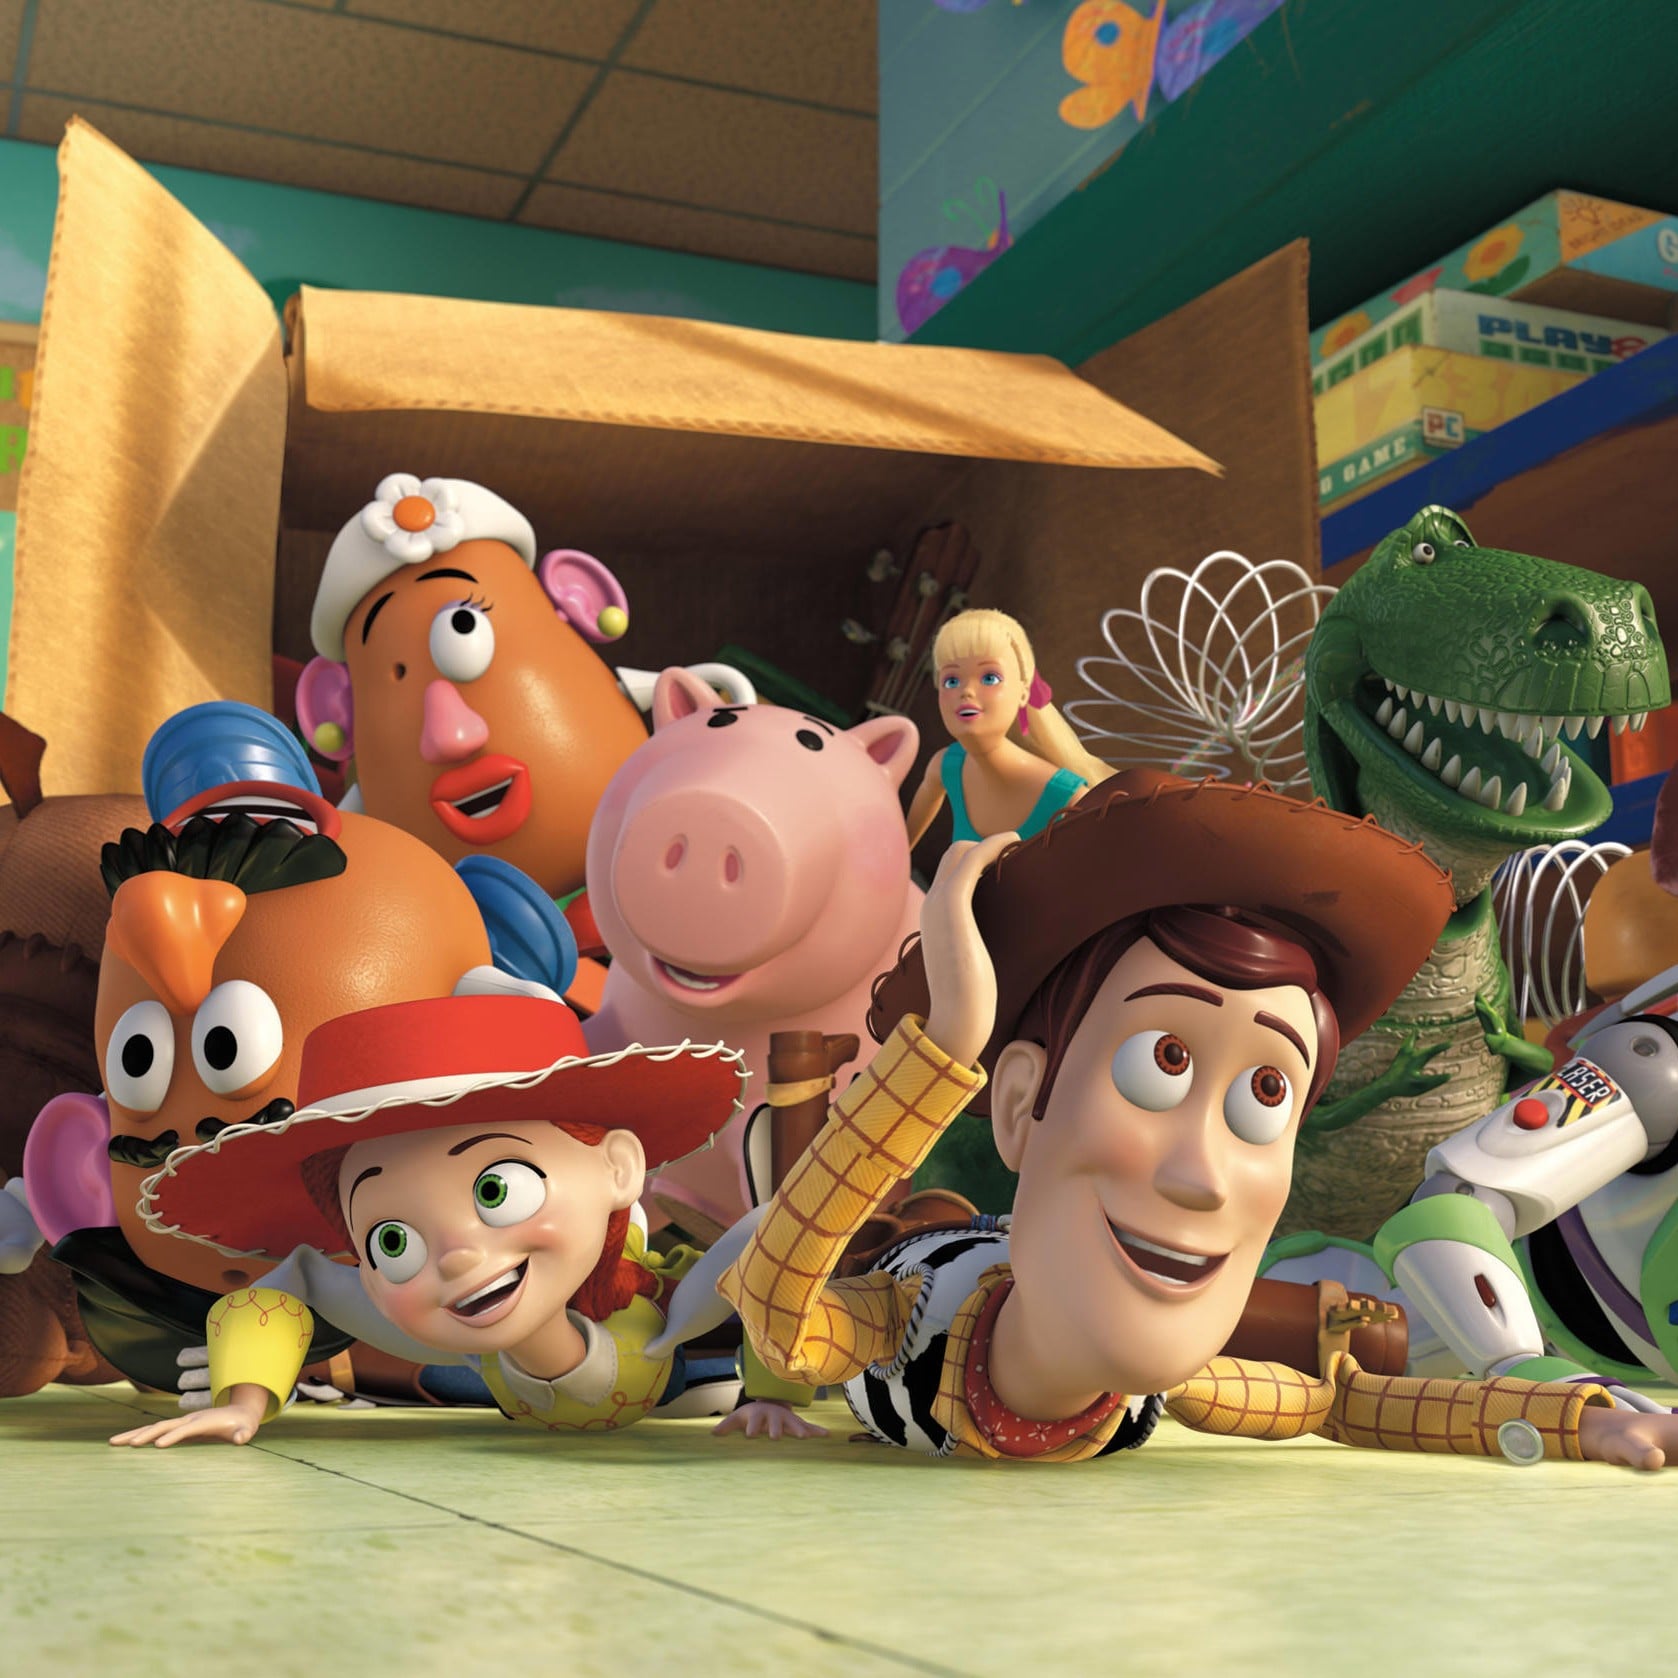 Pixar Movies Ranked From Best to Worst For Kids | POPSUGAR Family